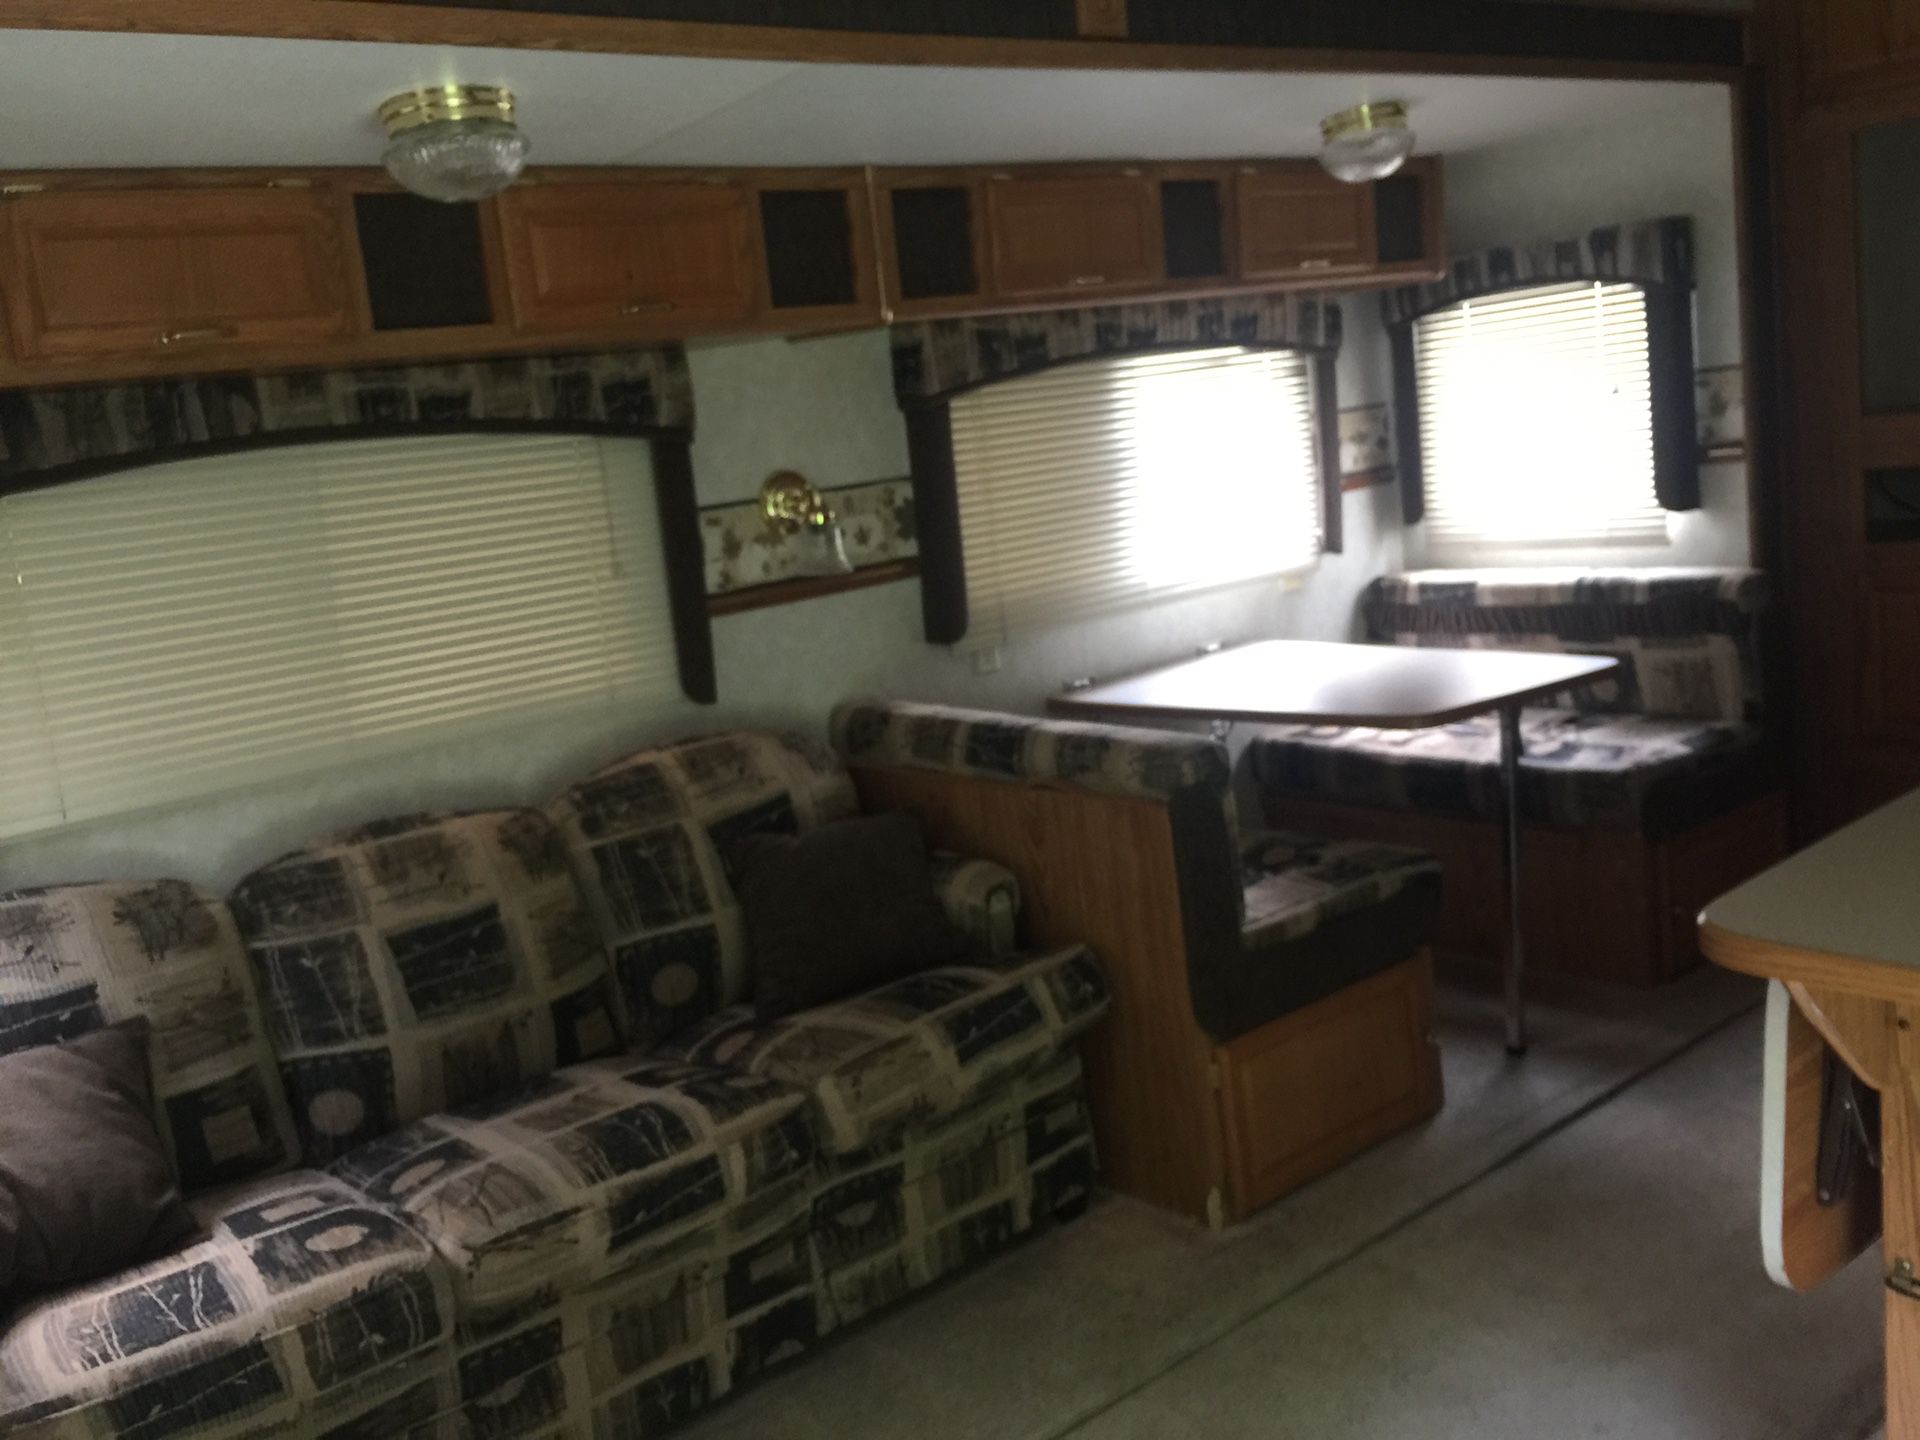 2004 36’ Wilderness Fleetwood RV- Fifth Wheel*Excellent Condition-Very Well Maintained*